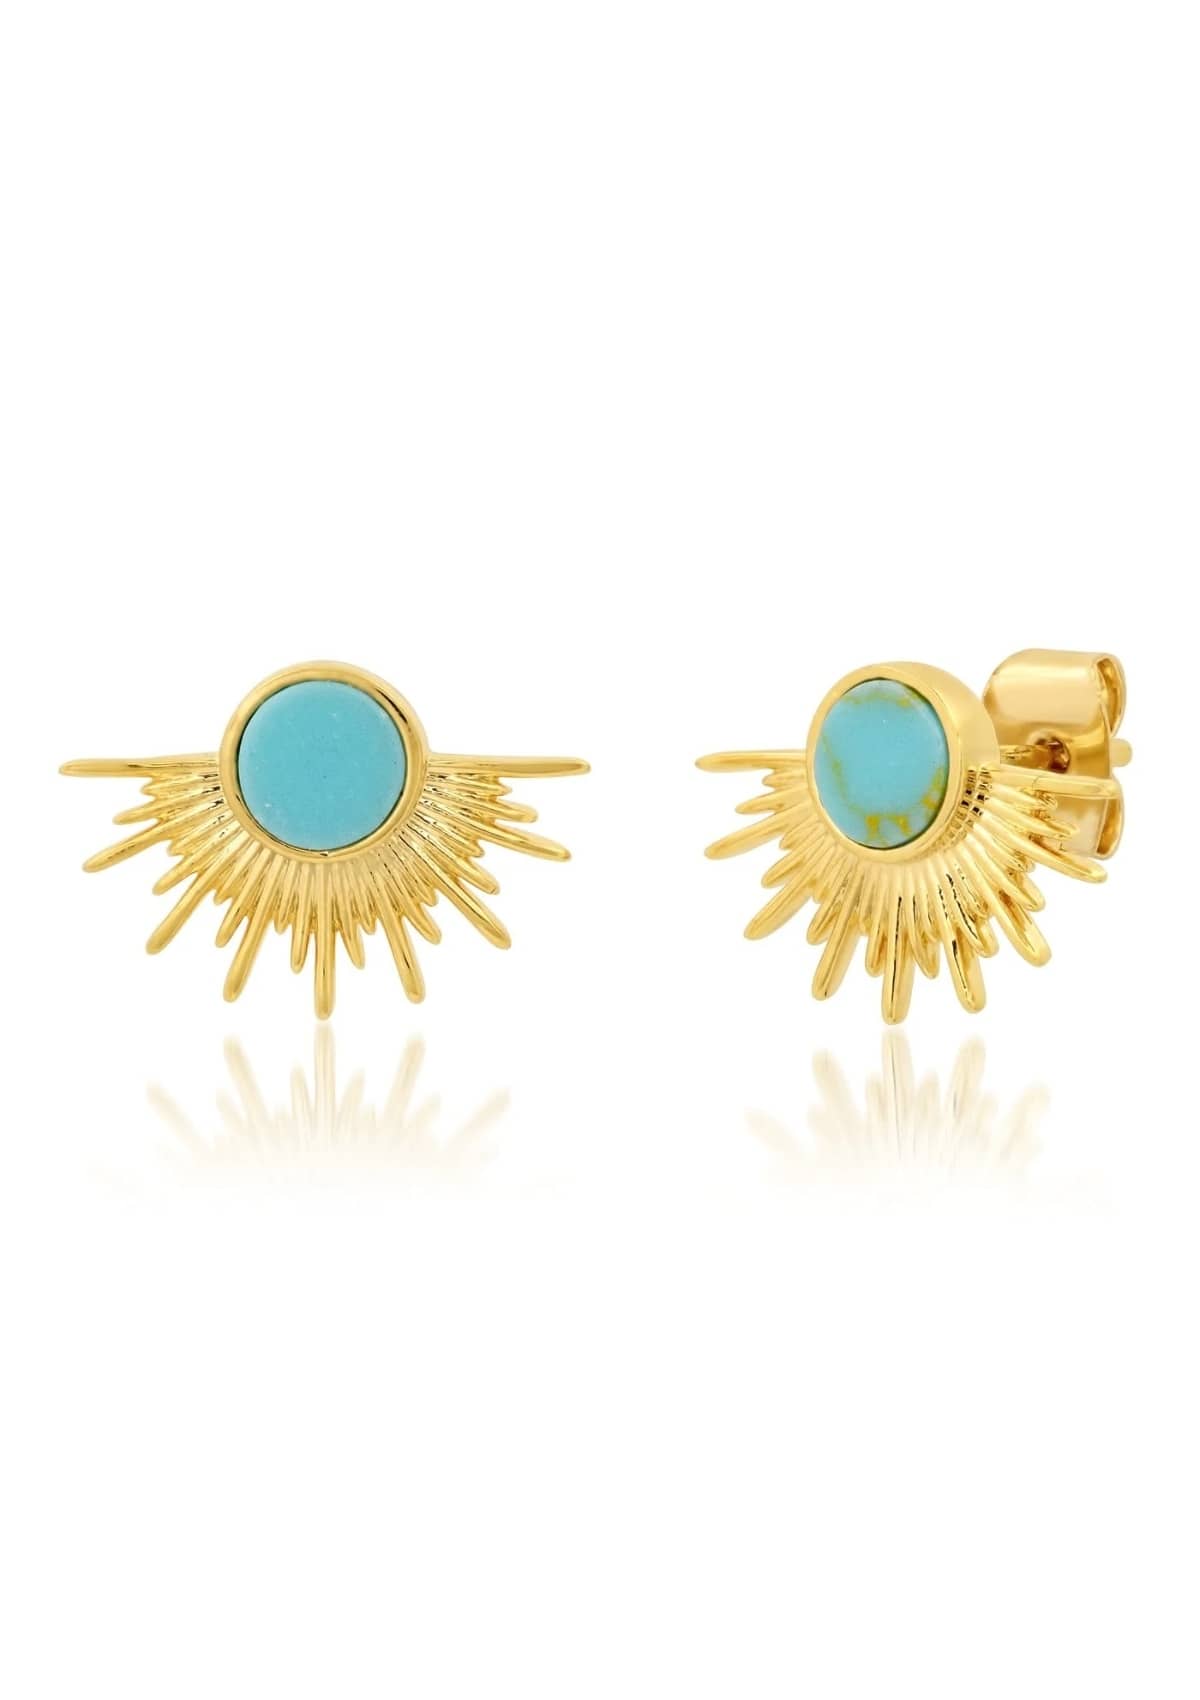 Round turquoise gold sun rays stud earrings.